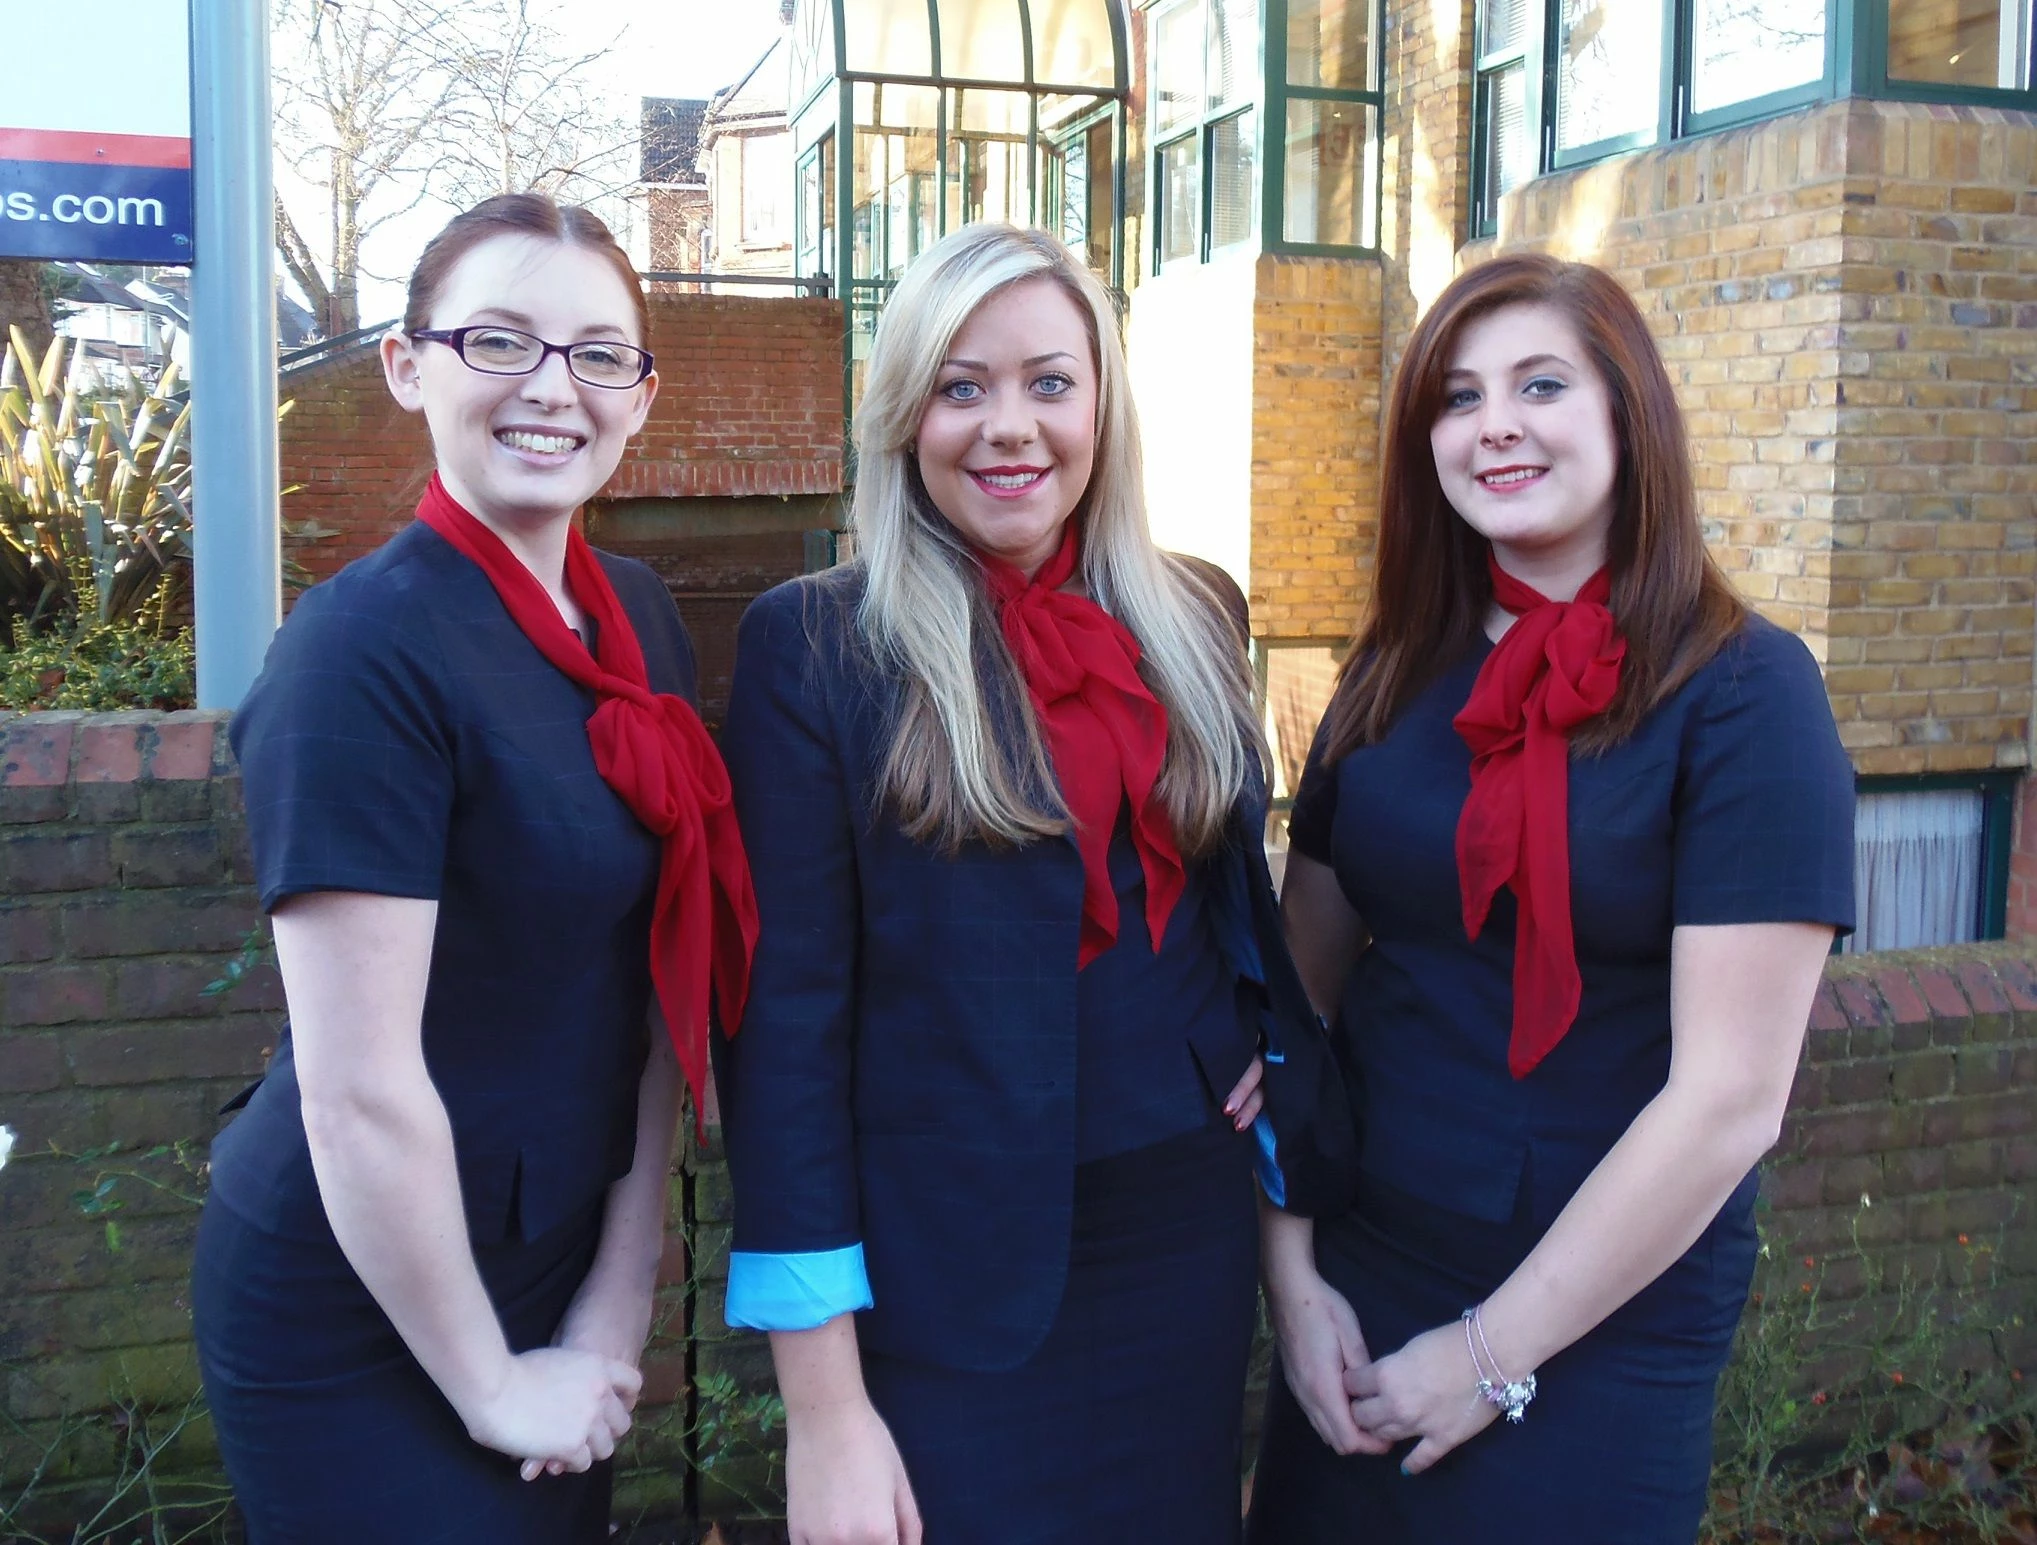 Three of Persimmon Homes South East’s new sales trainees – from left: Chelsie Butler, Sophie Keulema